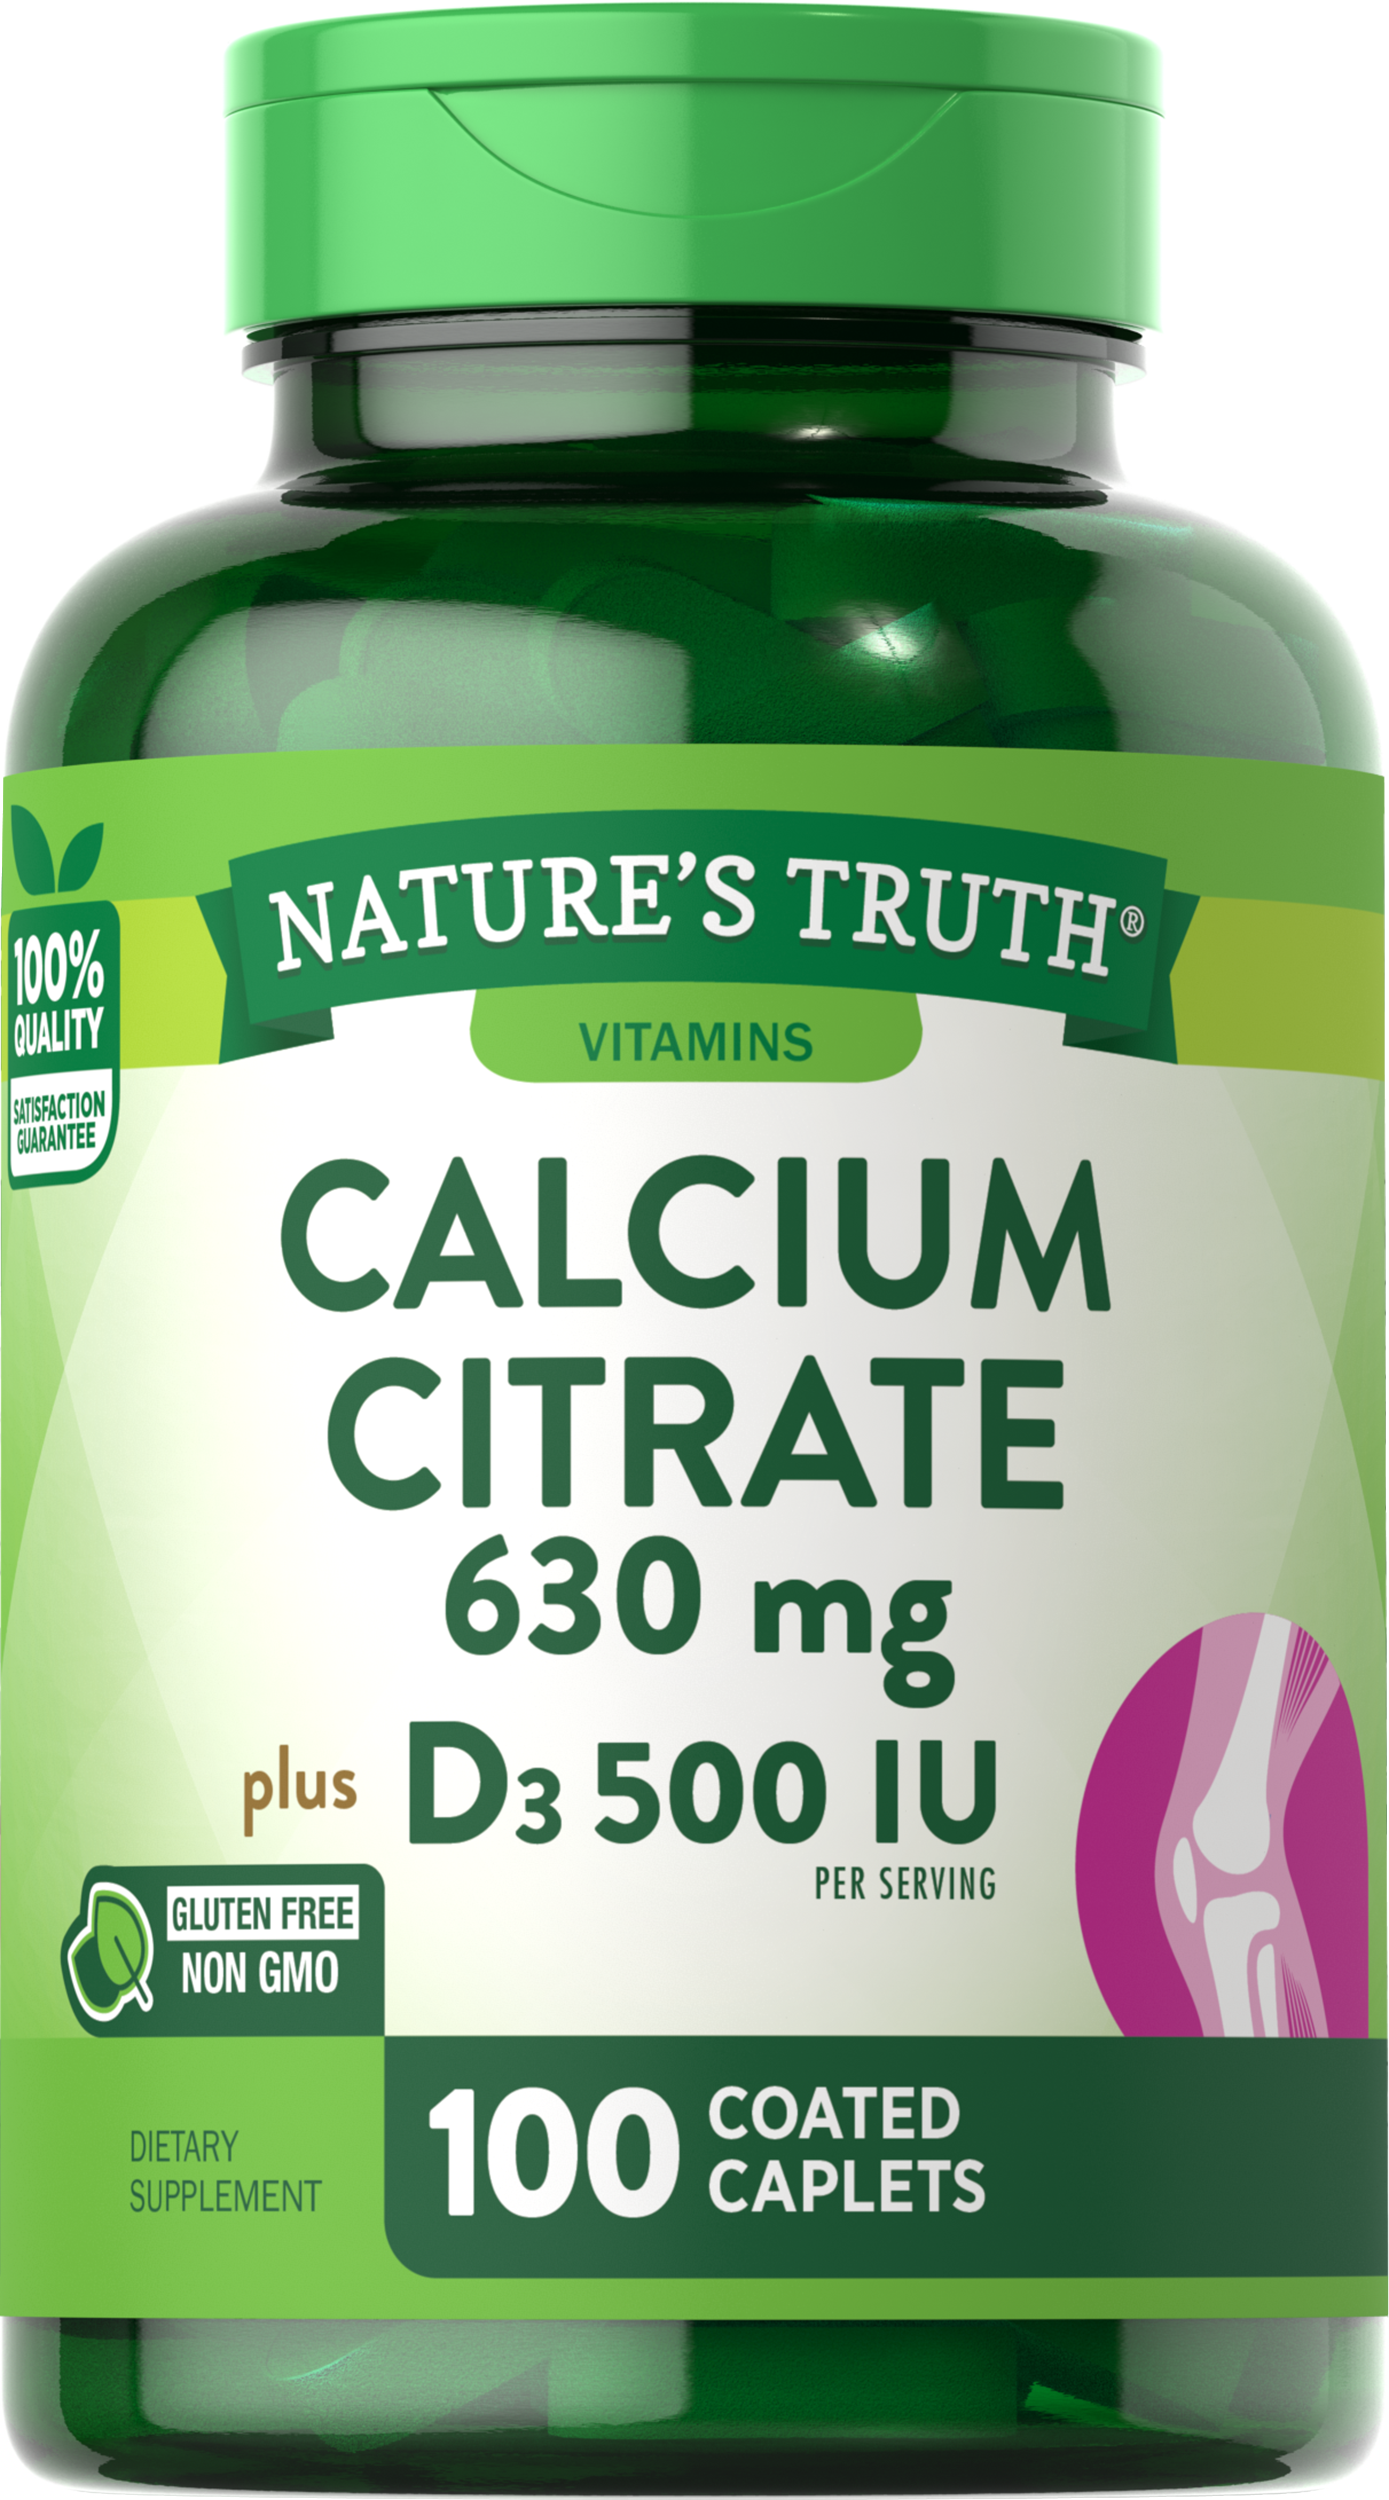 Calcium Citrate 630 mg with Vitamin D3